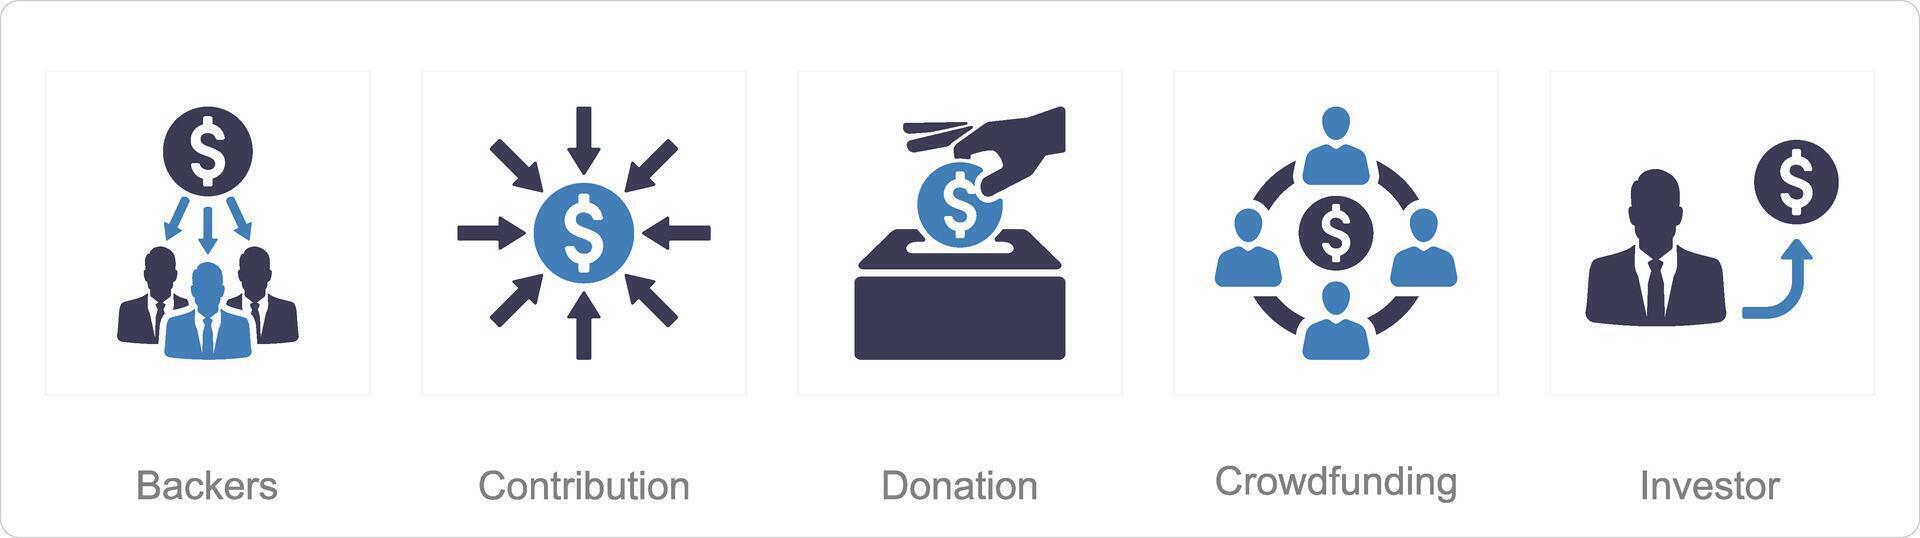 A set of 5 Crowdfunding icons as backers, contribution, donation vector